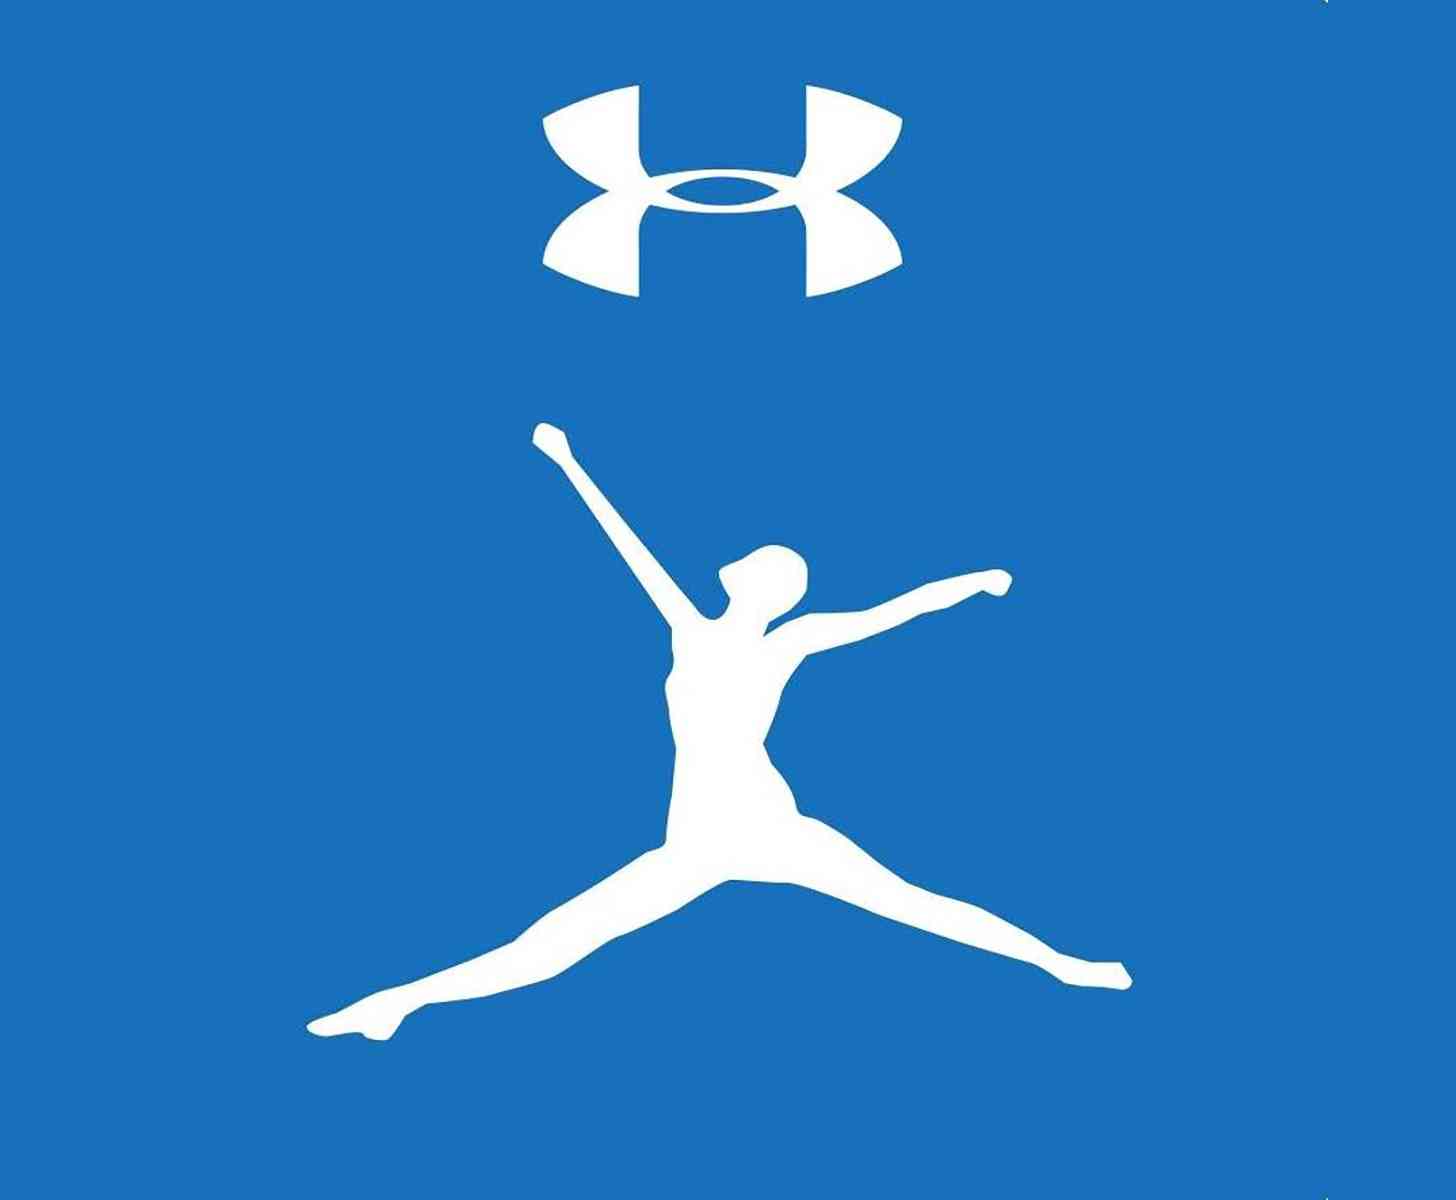 under armour fitness pal